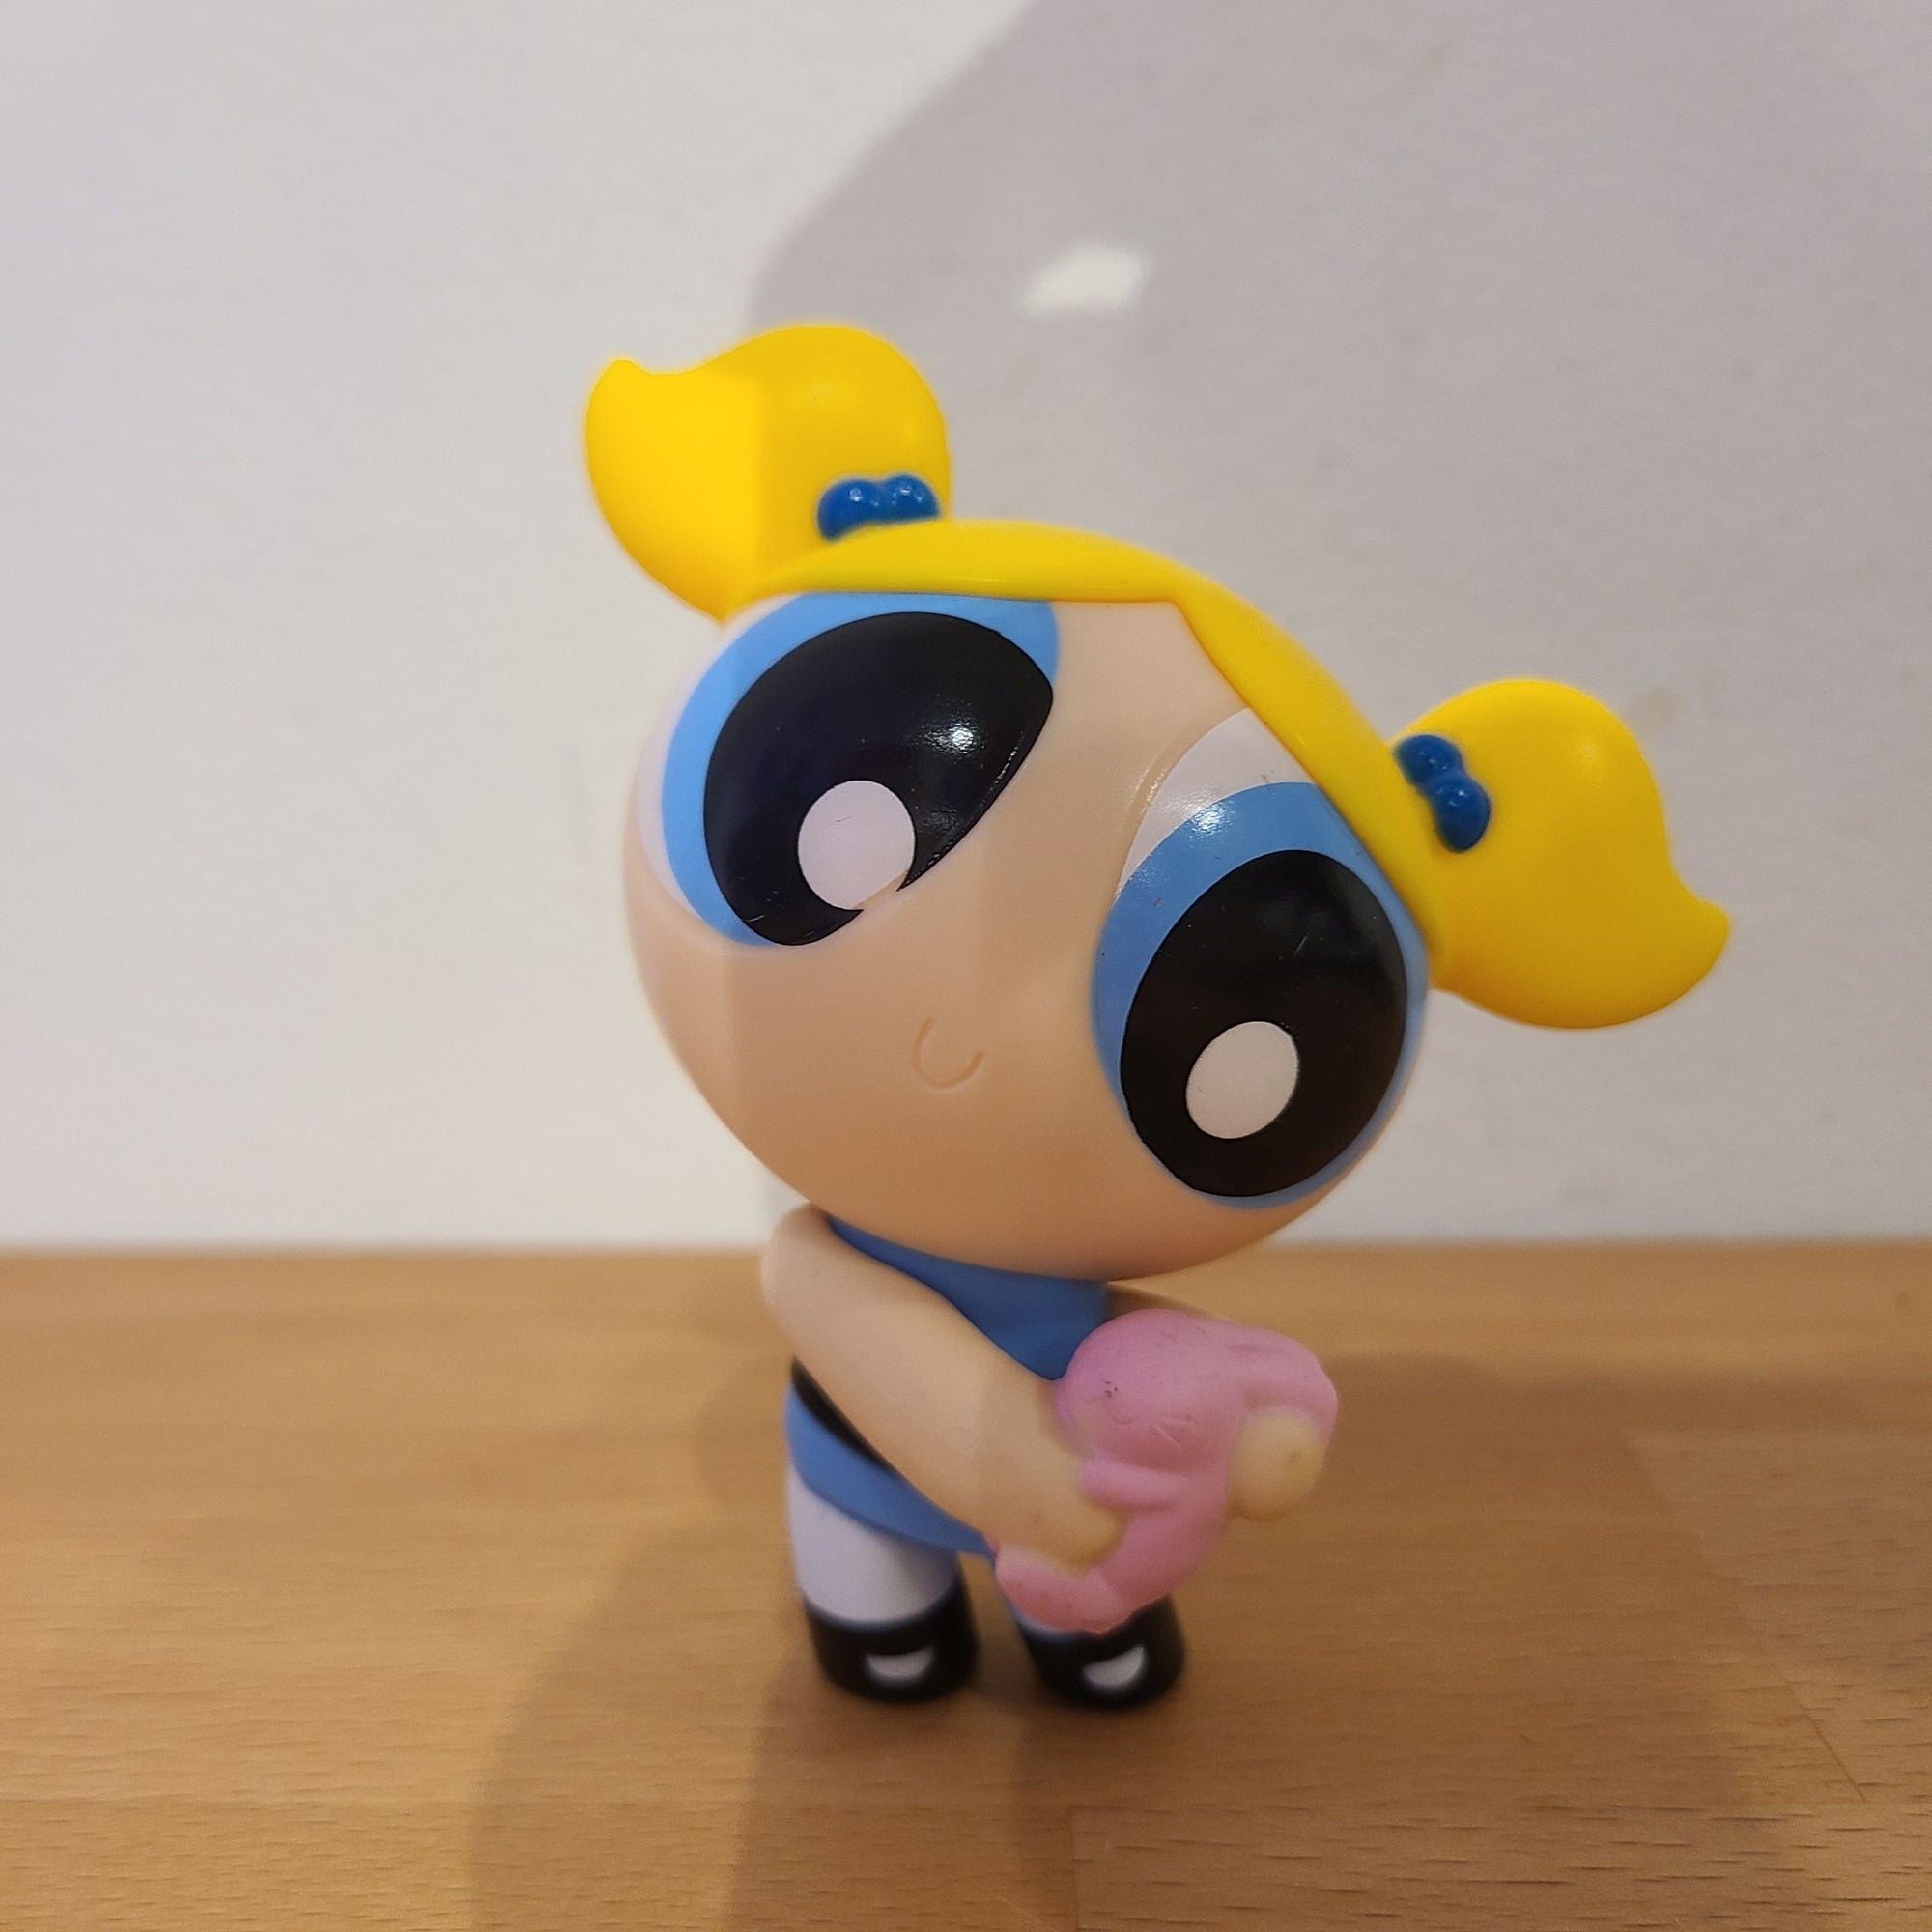 Blushing Bubbles - Powerpuff Girls by Happy Meal McDonalds Toys 2016 - 1